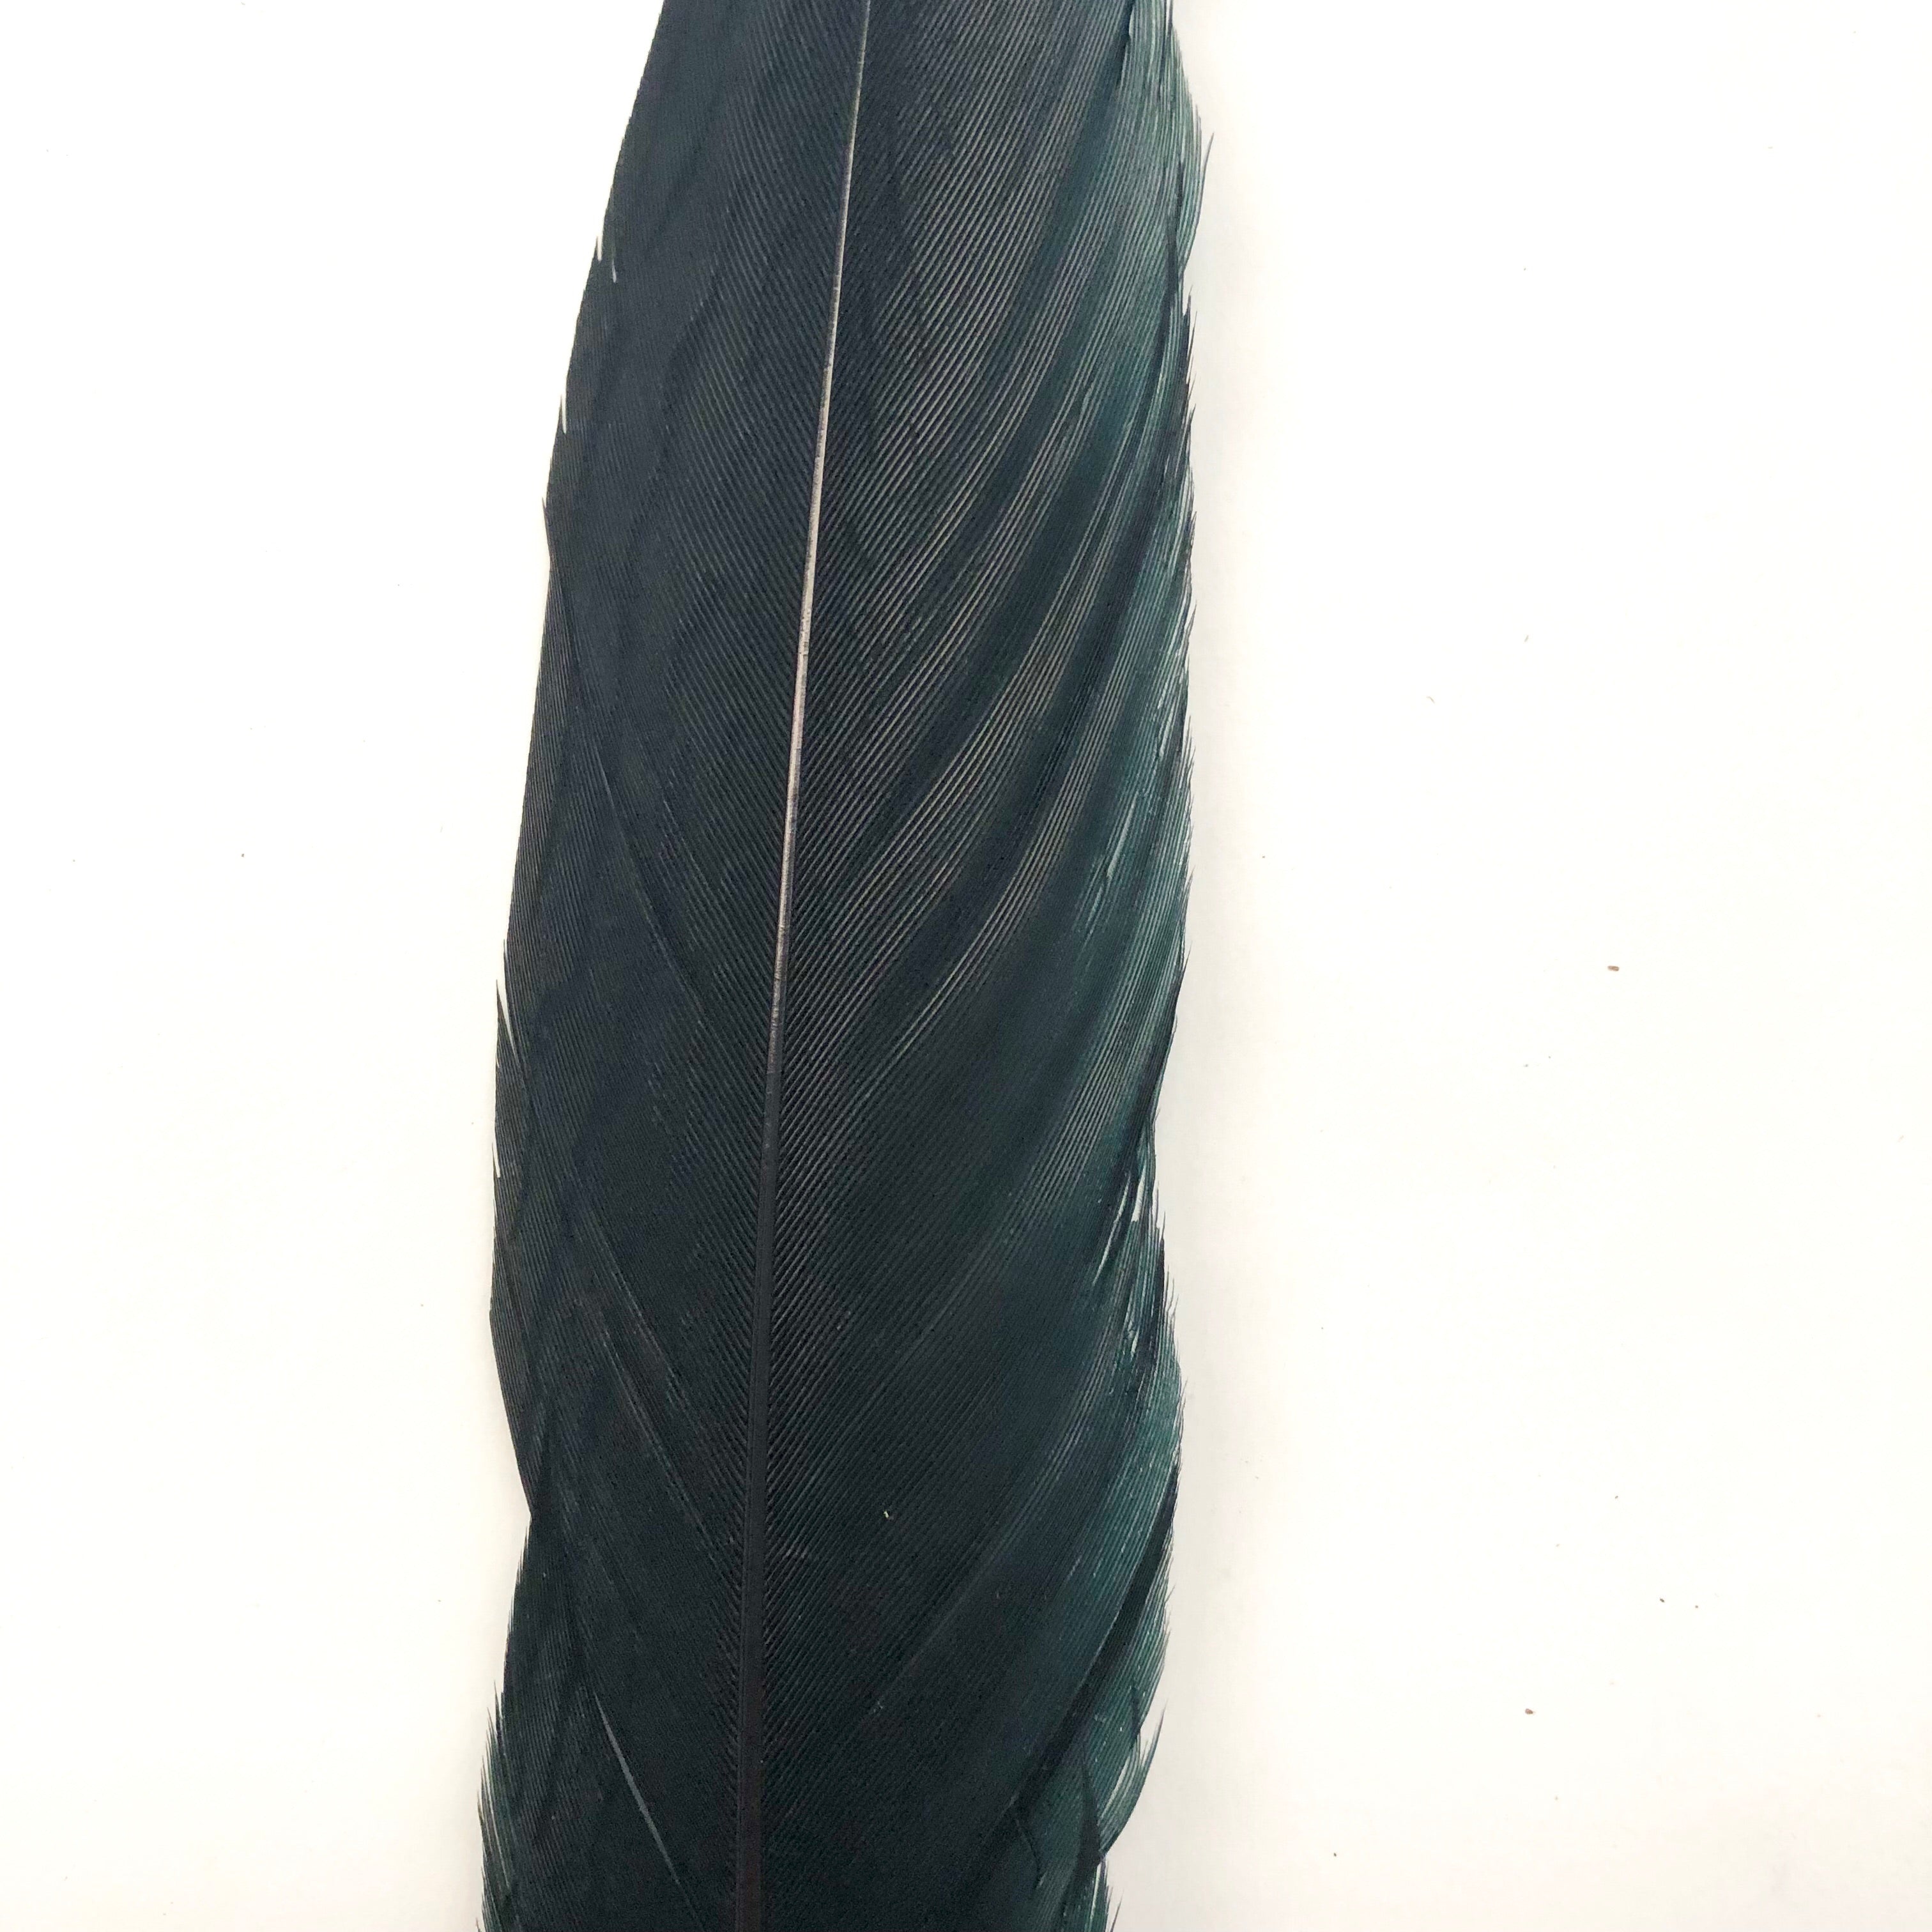 6" to 10" Silver Pheasant Tail Feather - Black ((SECONDS))